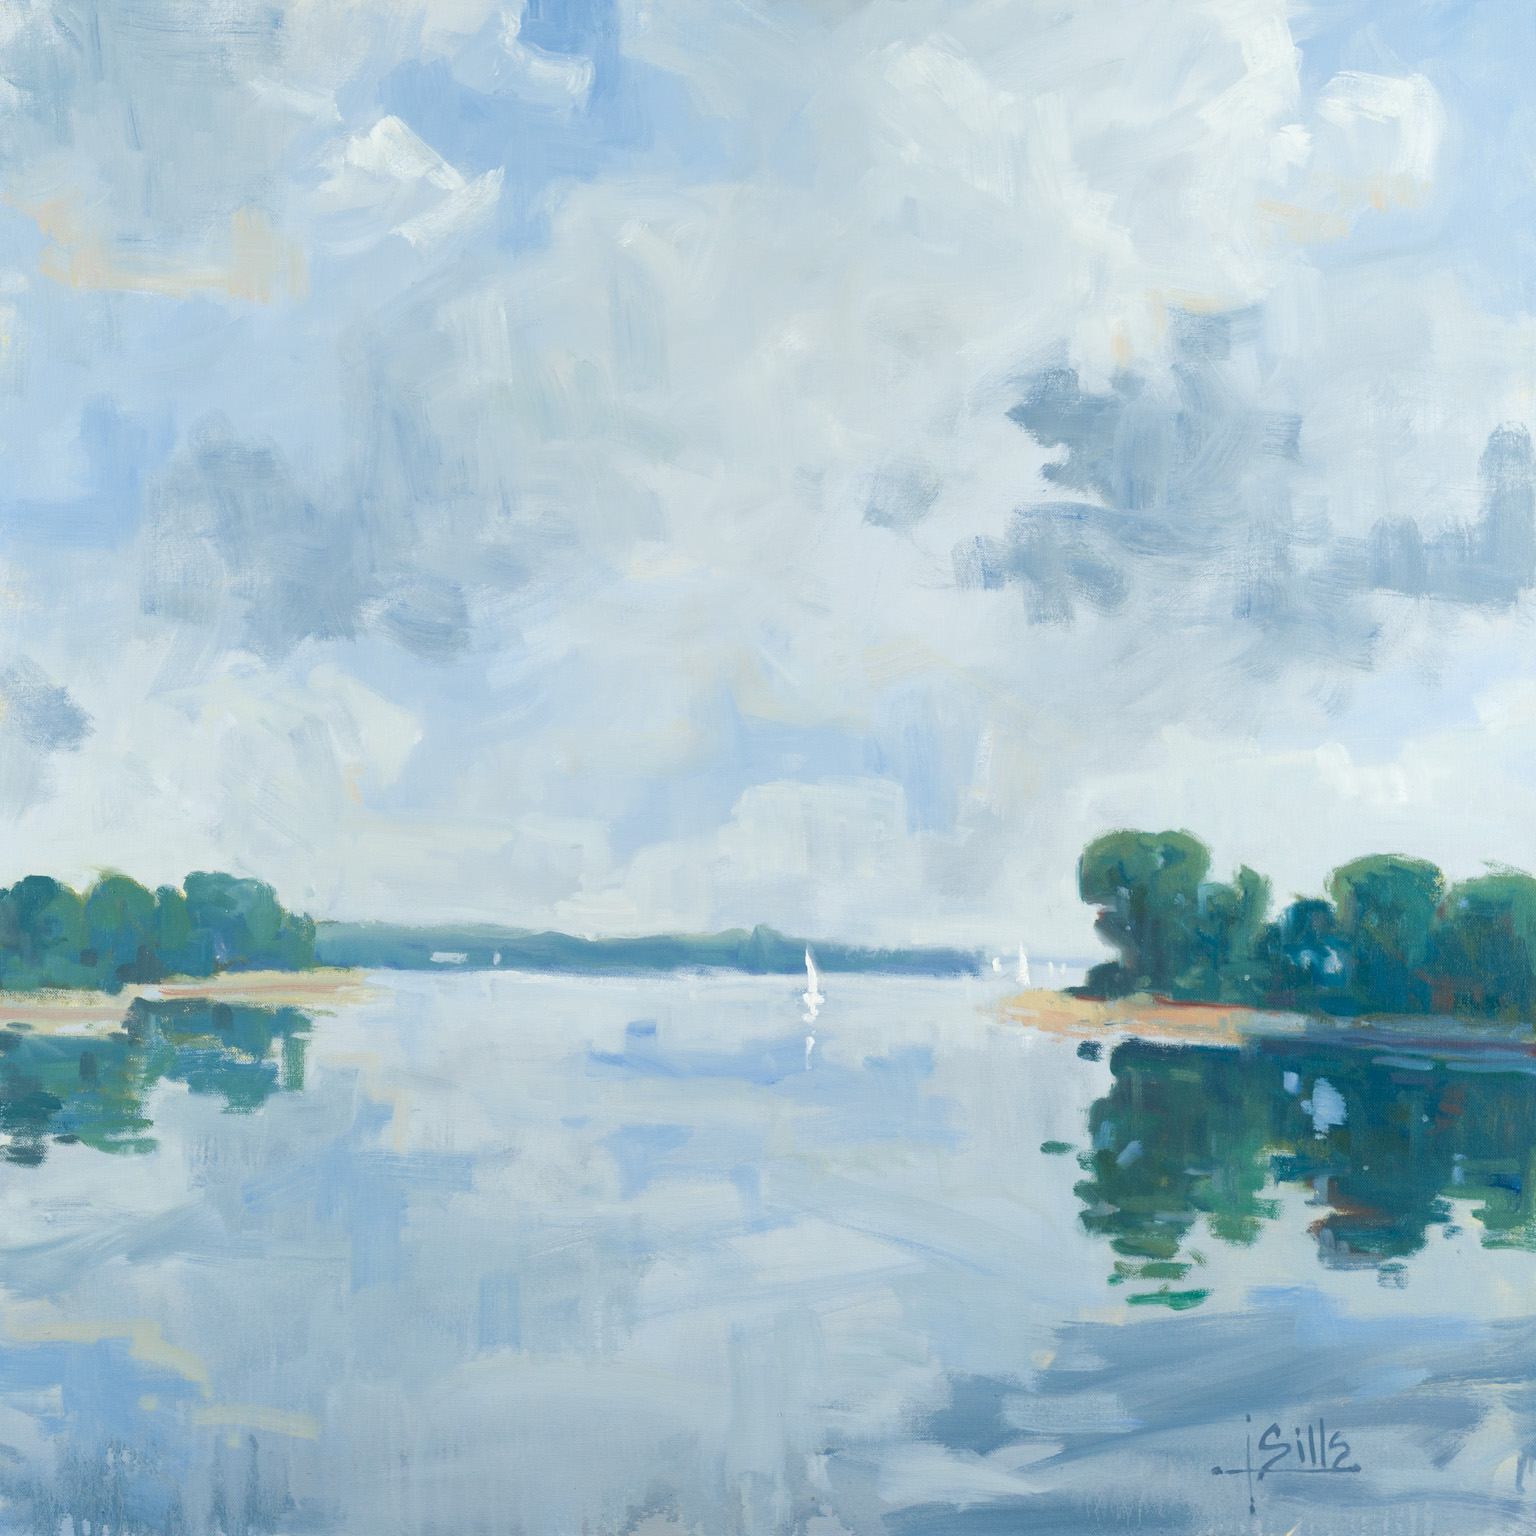 Sills, "Sky," Oil on Canvas, 36 x 36 in. 